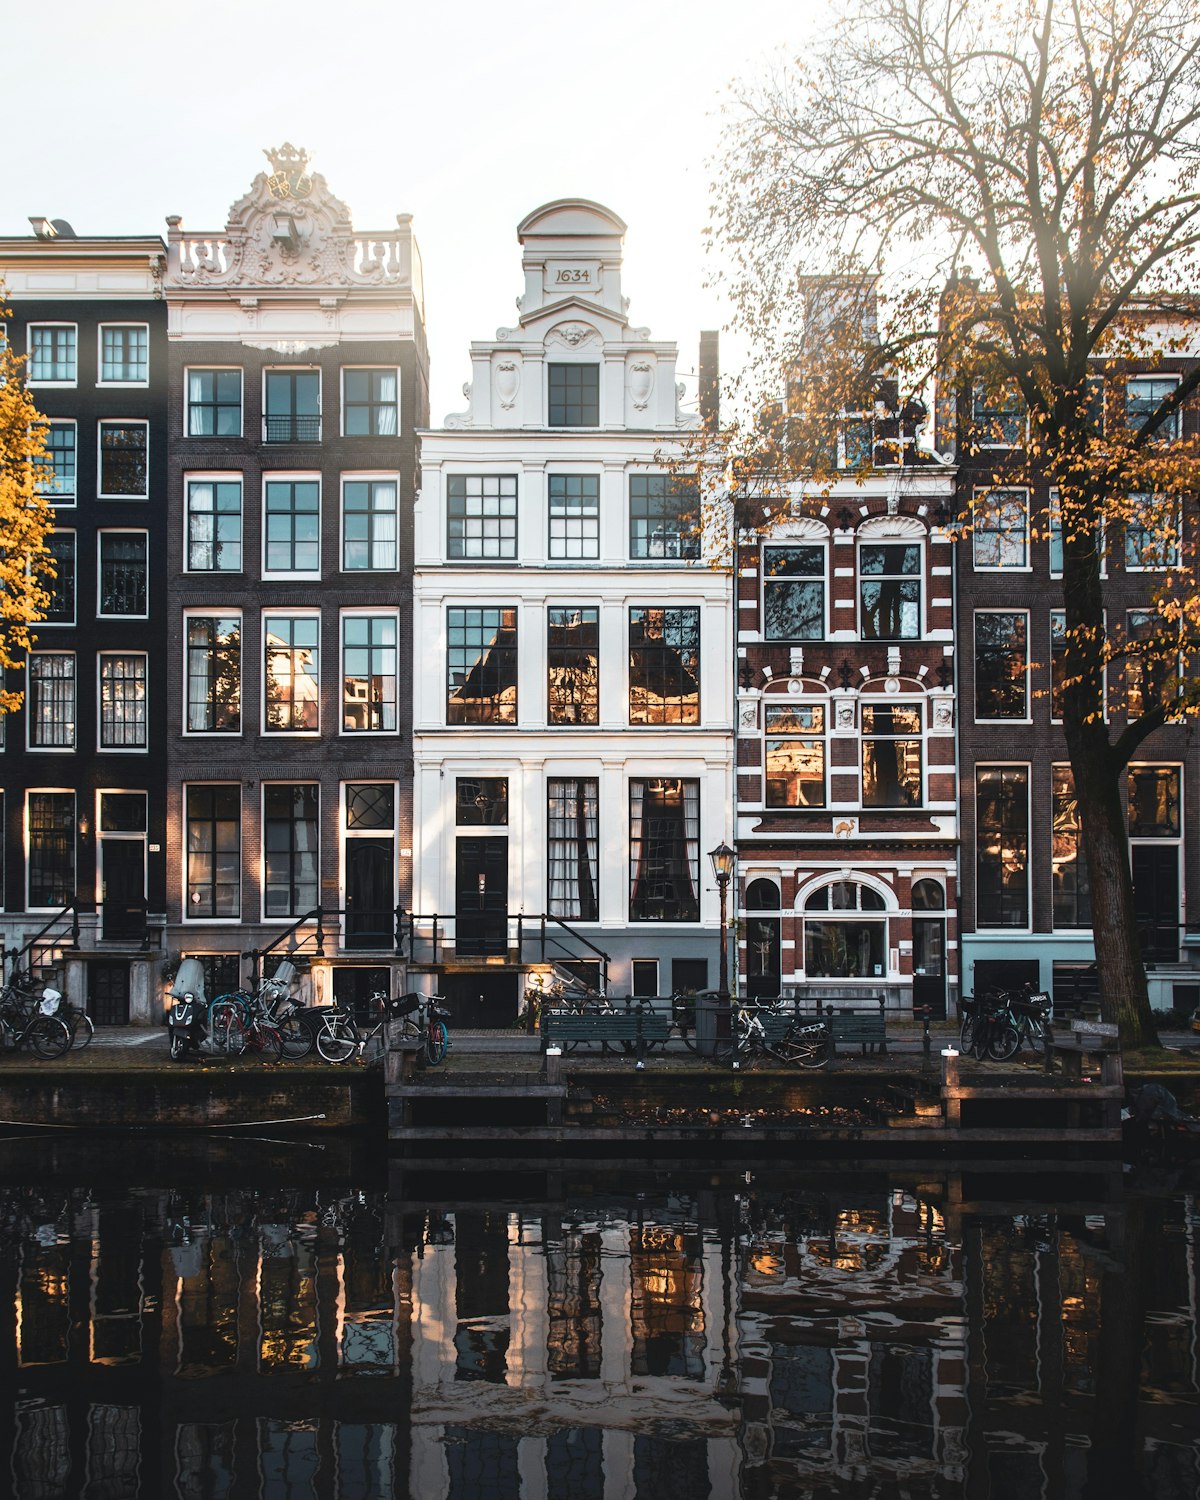 Things To Do In Amsterdam: 3 Day Travel Guide